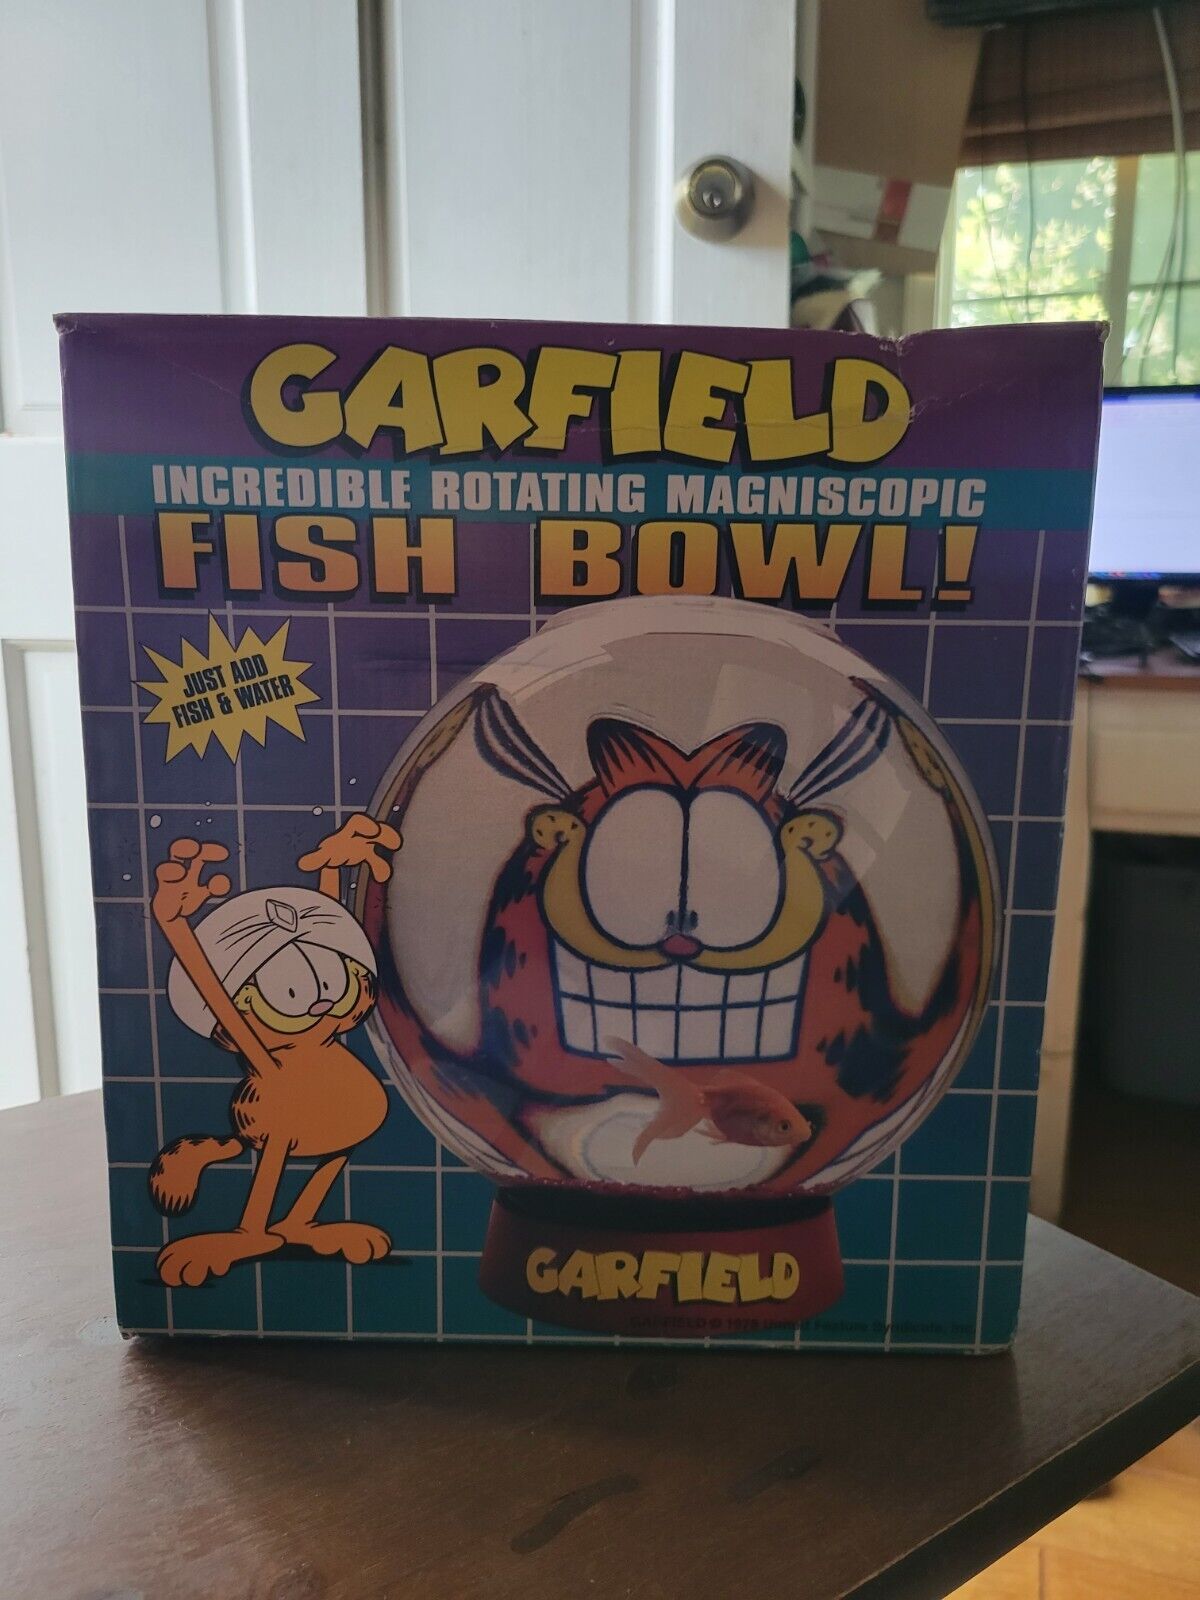 Vintage Garfield Fish Bowl Rotating Magniscopic New in Box Unused Collection